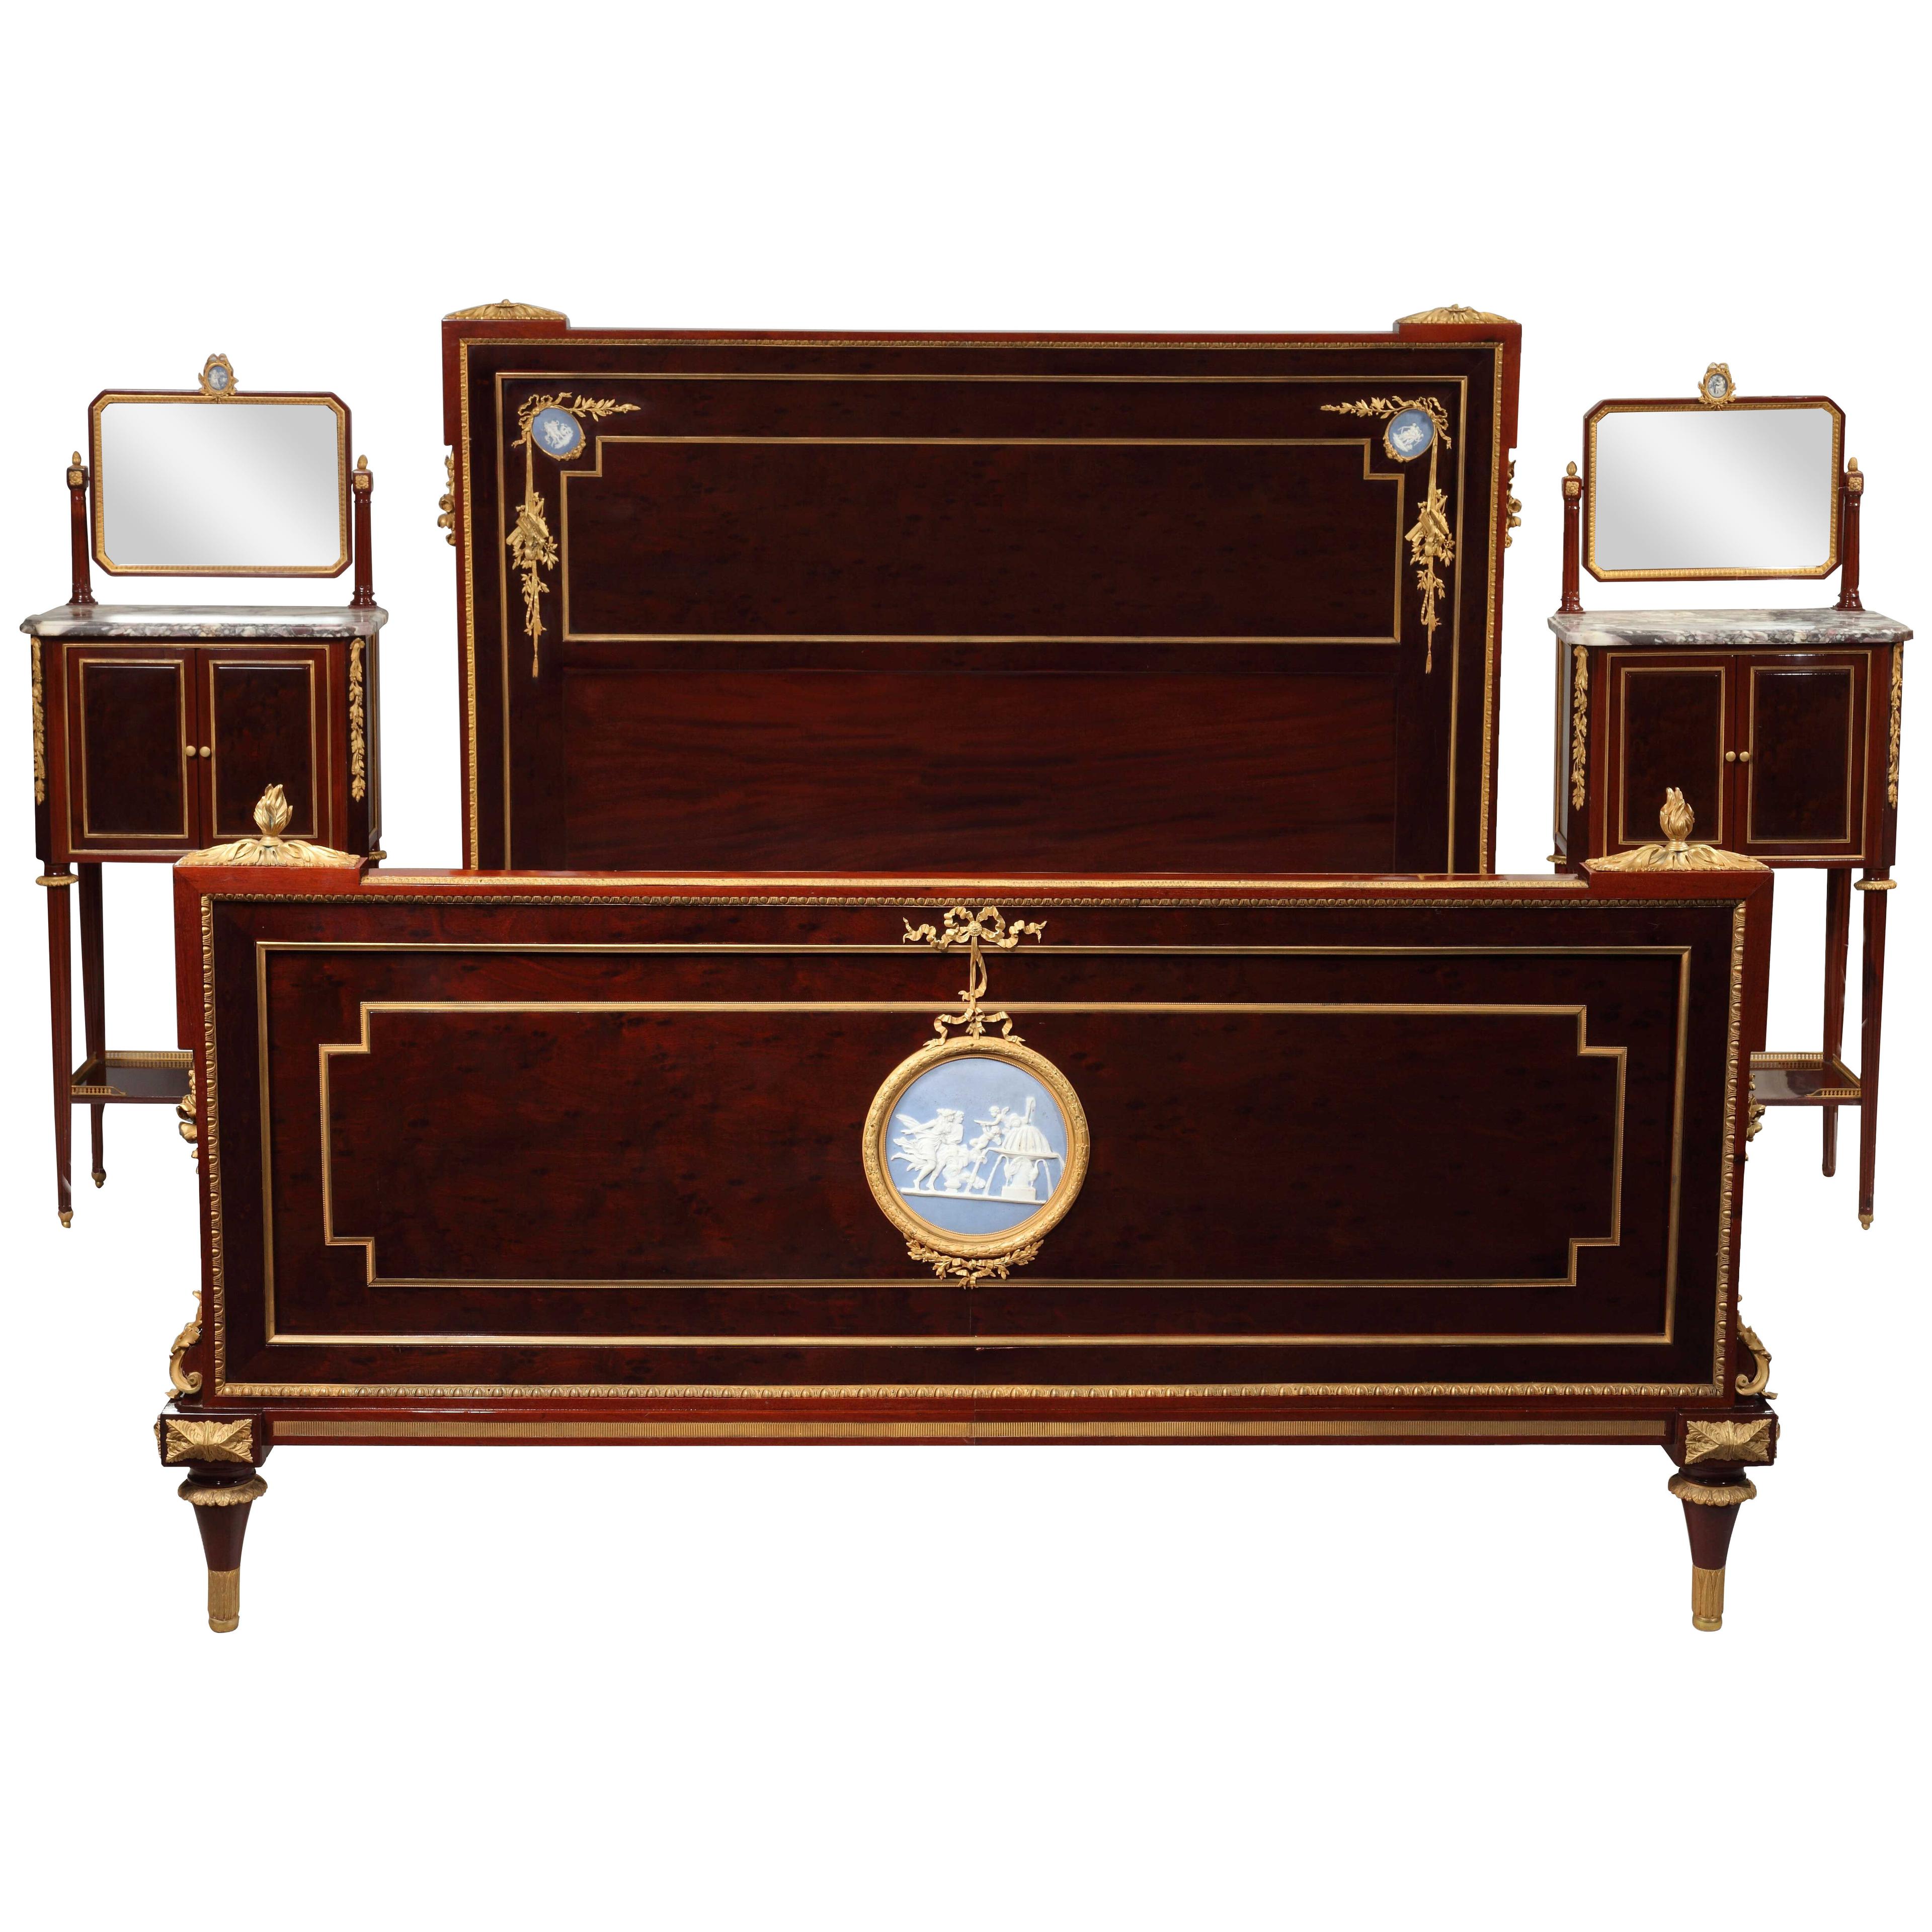 Four-Pieces Bedroom Set Attributed to A. Krieger, France, Circa 1880